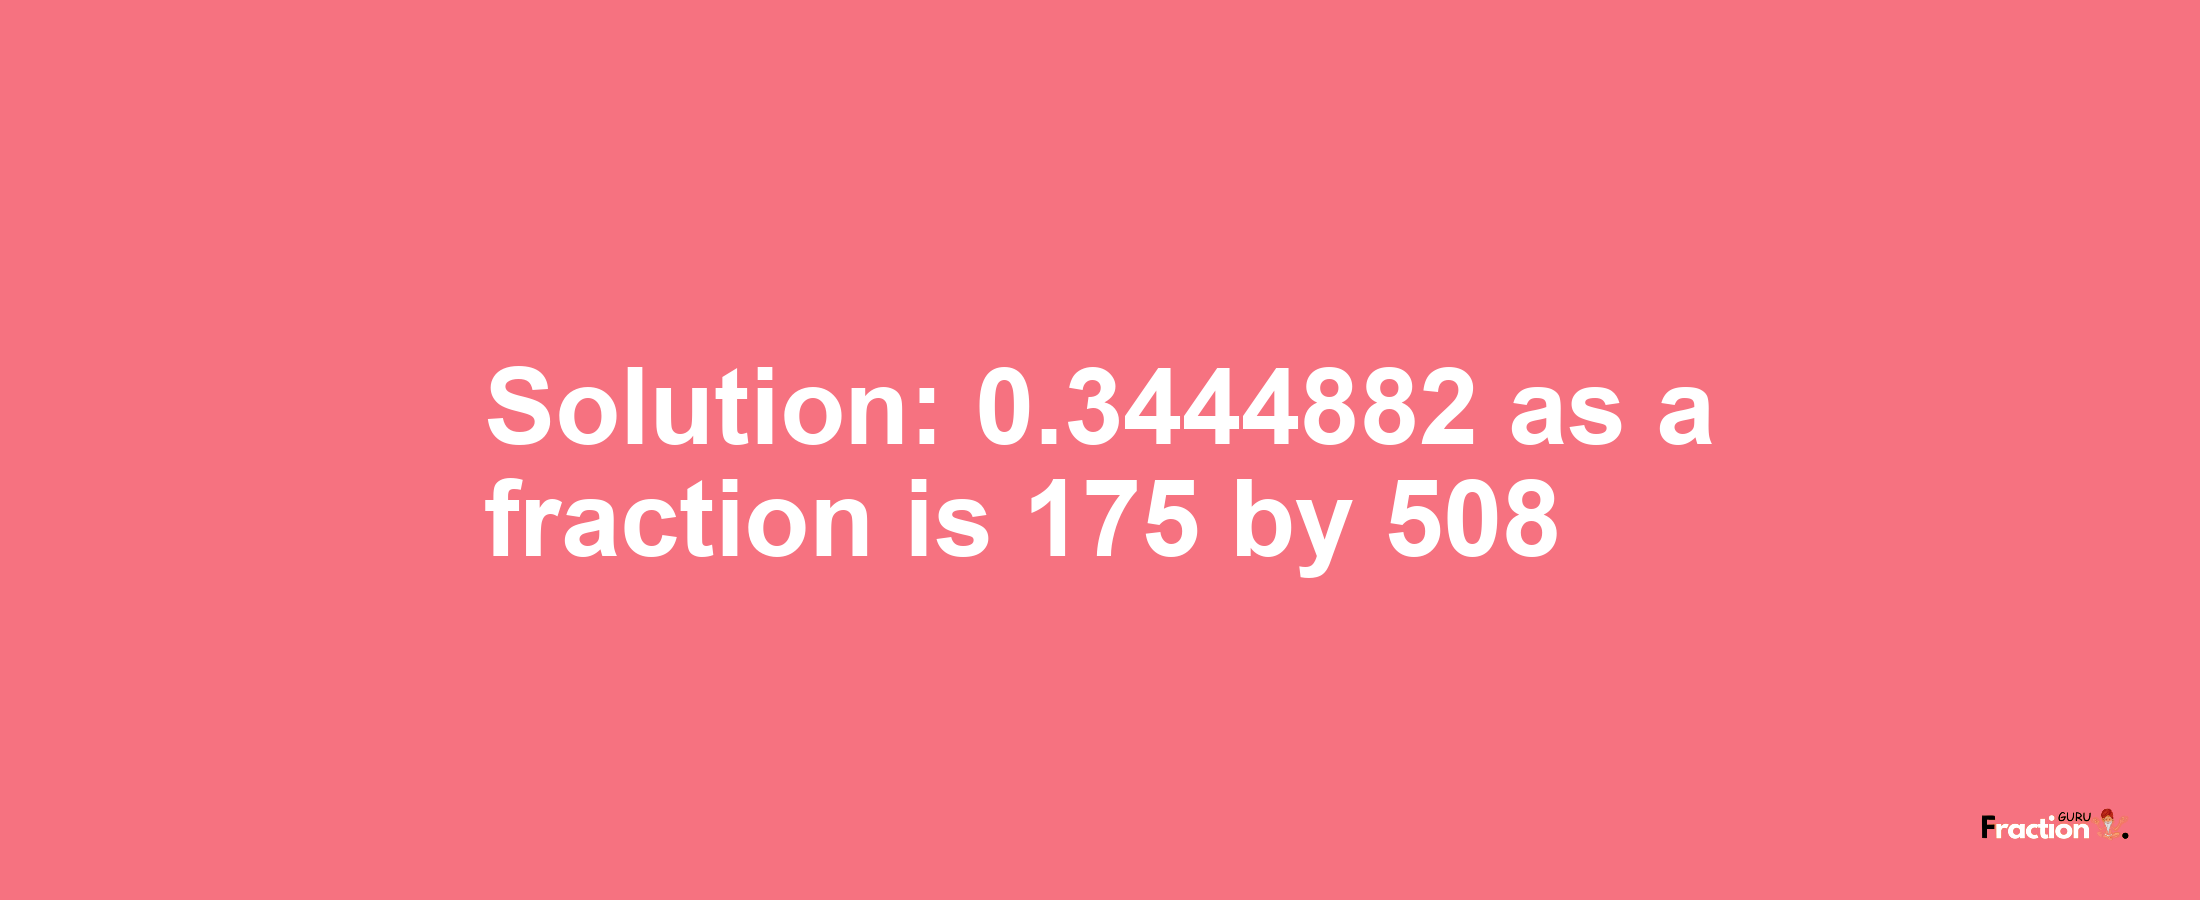 Solution:0.3444882 as a fraction is 175/508